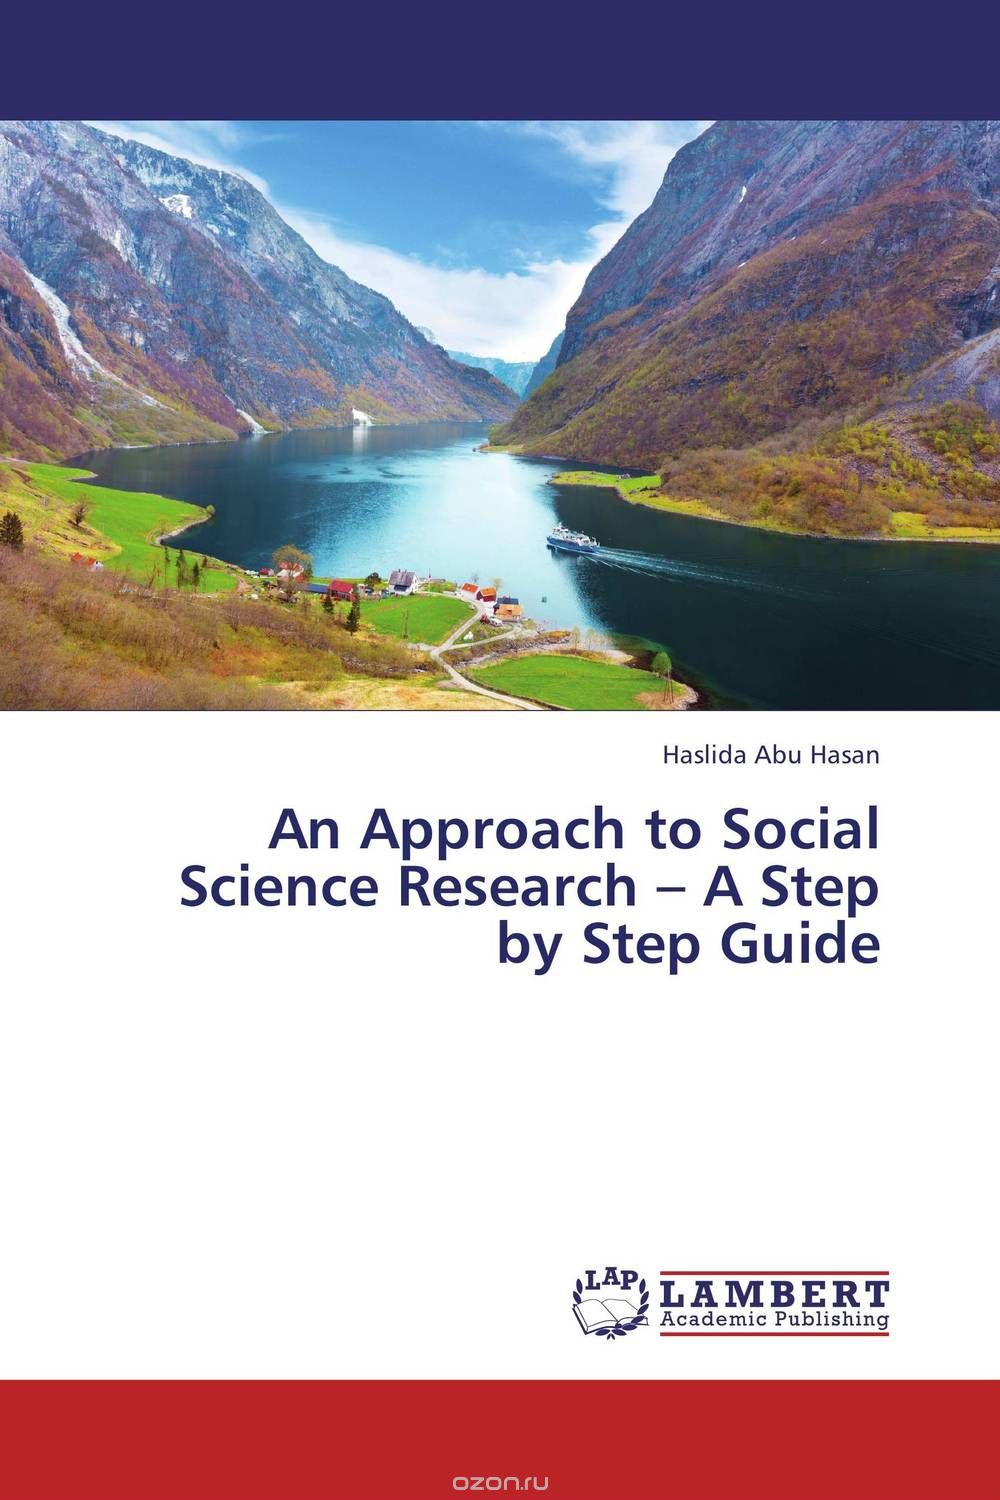 Скачать книгу "An Approach to Social Science Research – A Step by Step Guide"